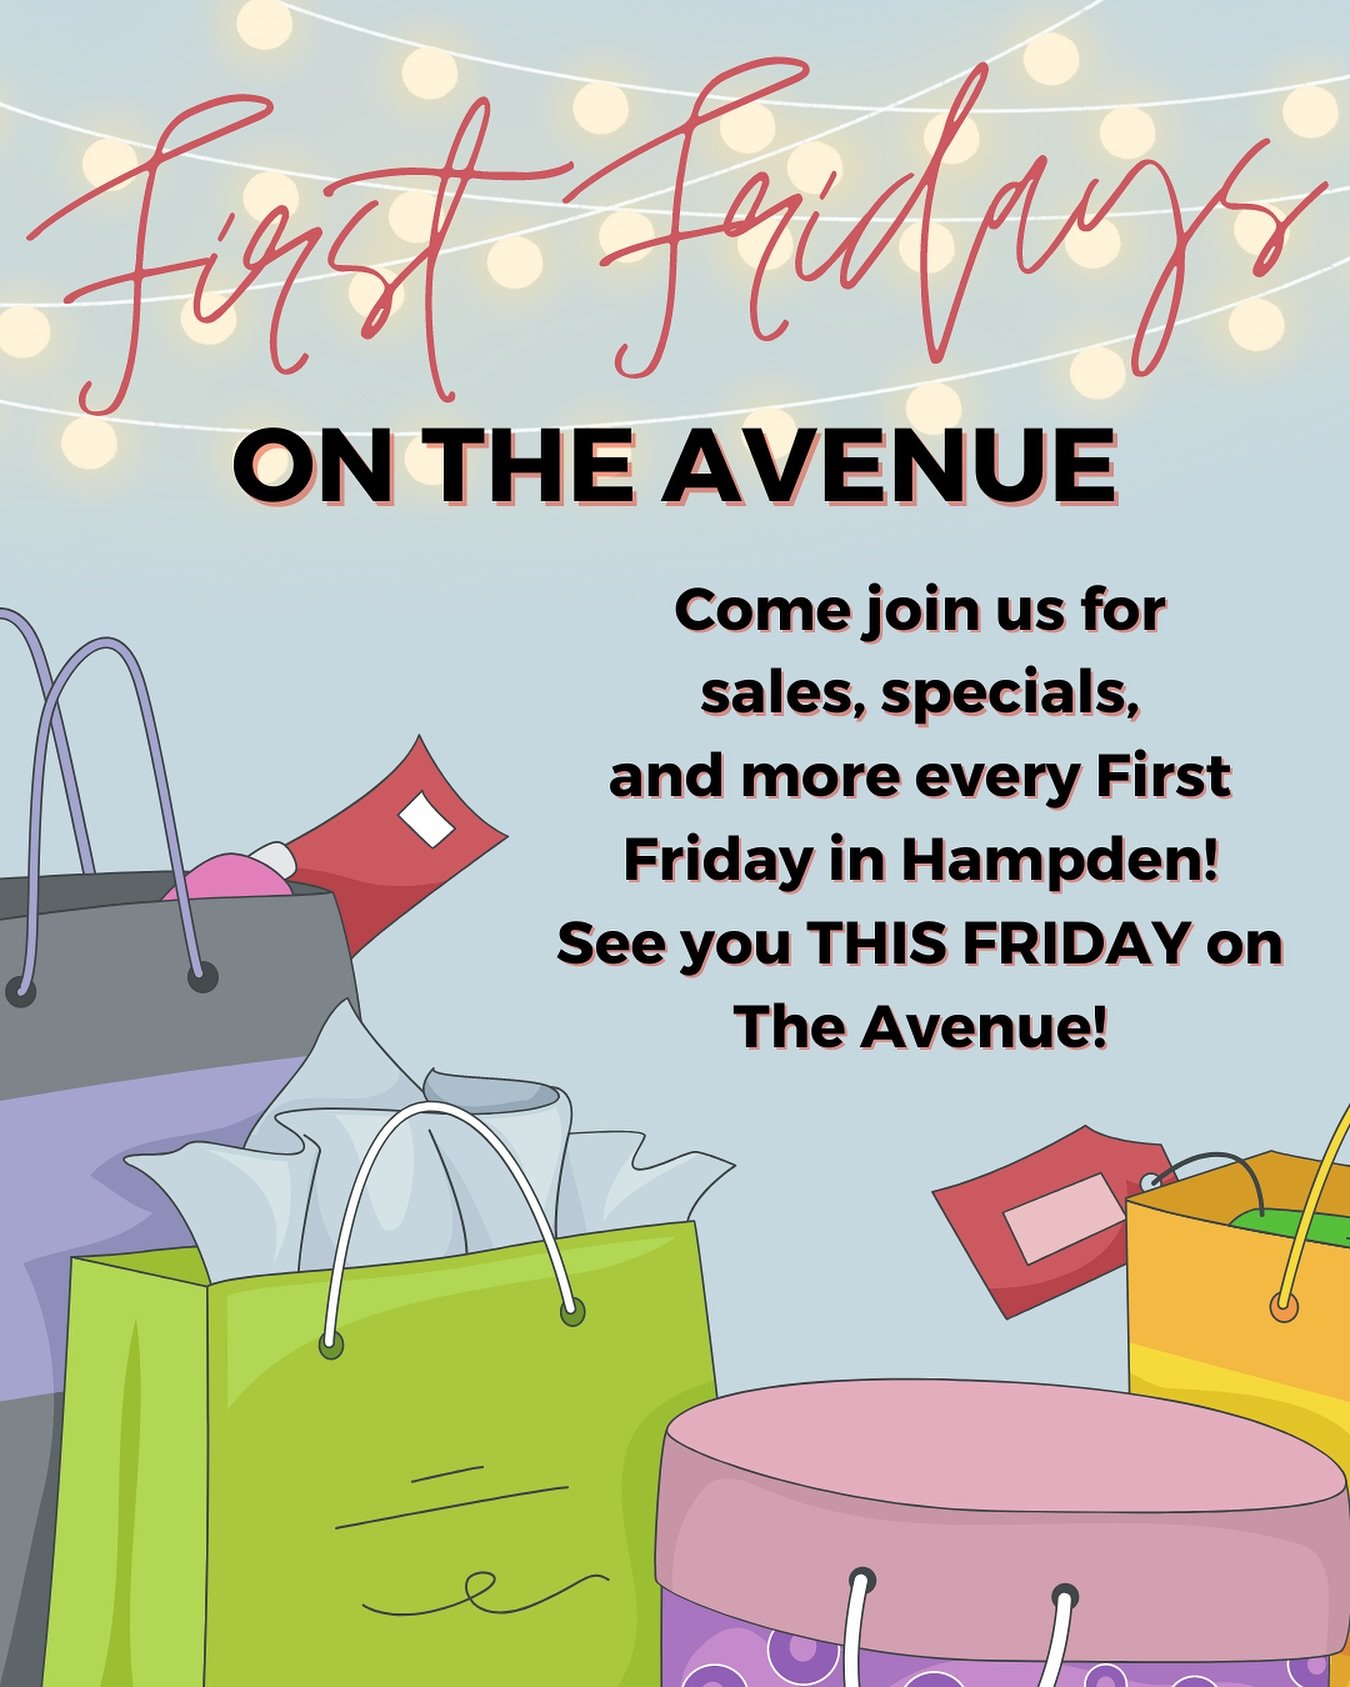 Happy First Fridaaaayyyy!!! 🎉 Every First Friday in Hampden, you can enjoy fabulous specials, treats, and good vibes throughout the neighborhood! Text your crew and  join us on the gorgeous day on The Avenue! 😍✨